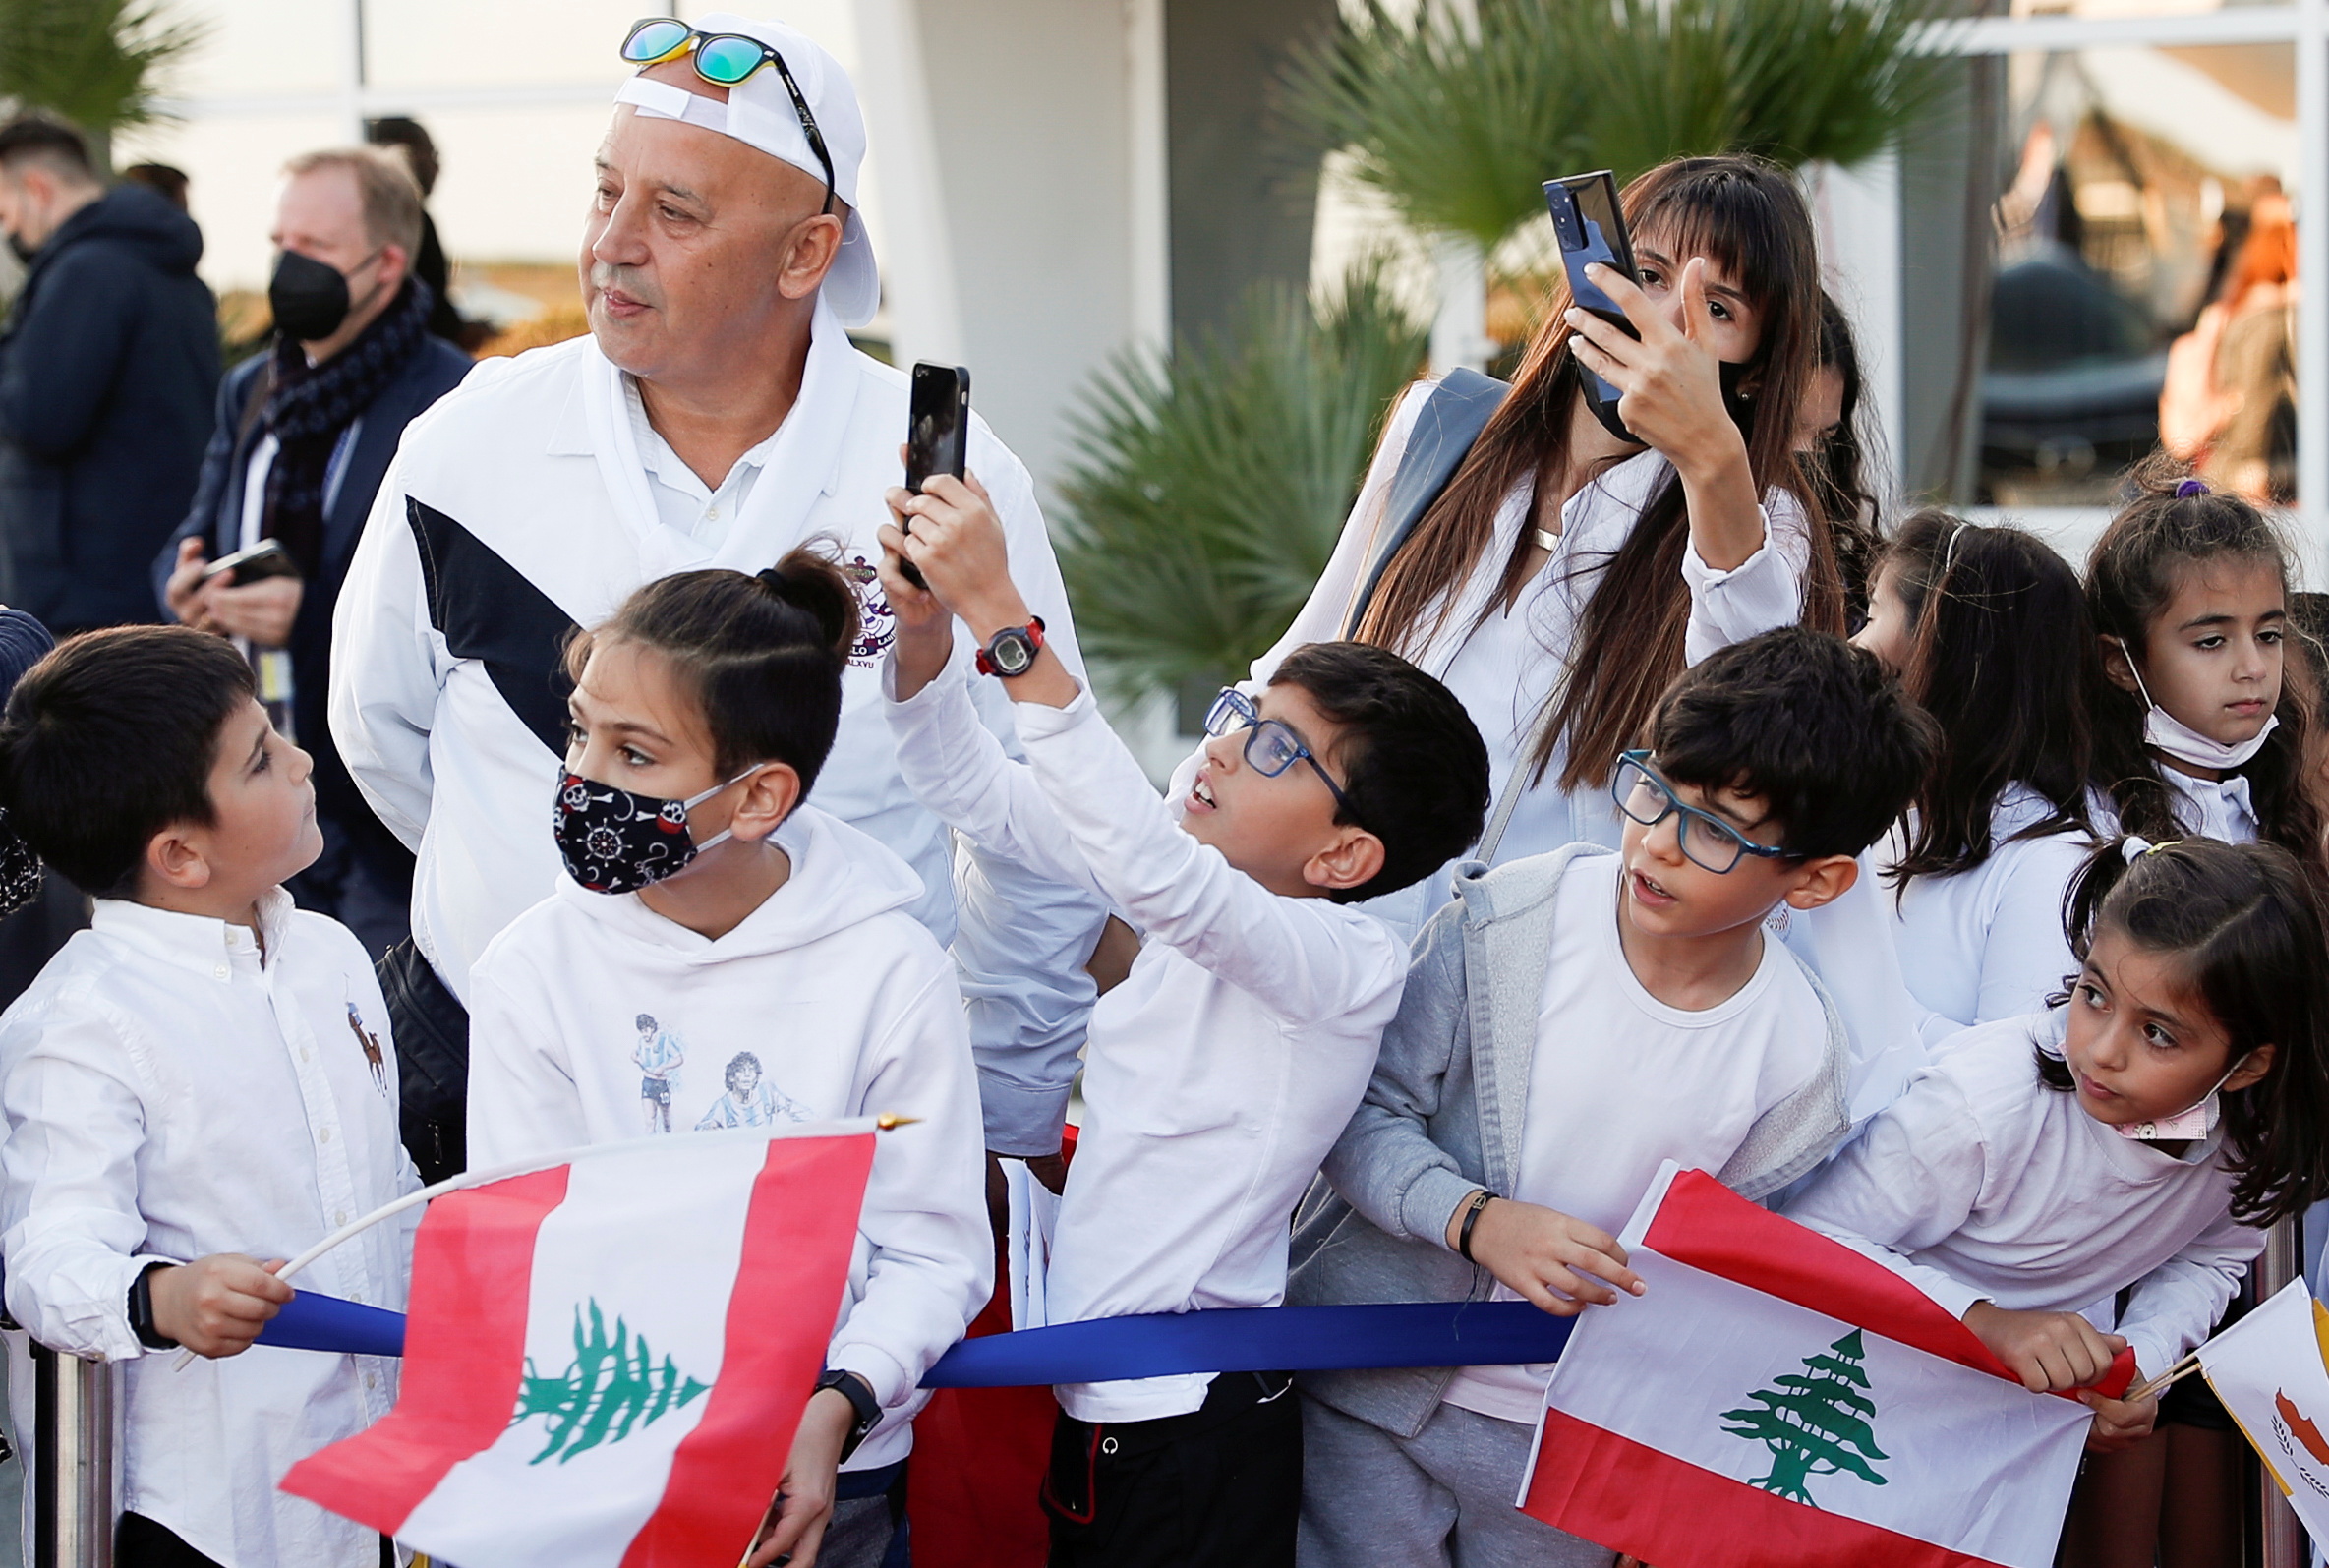 Children holding flags of Lebanon wait for Pope Francis at the Larnaca International Airport as he arrives for his visit to Cyprus and Greece, in Larnaca, Cyprus, December 2, 2021. REUTERS/Guglielmo Mangiapane